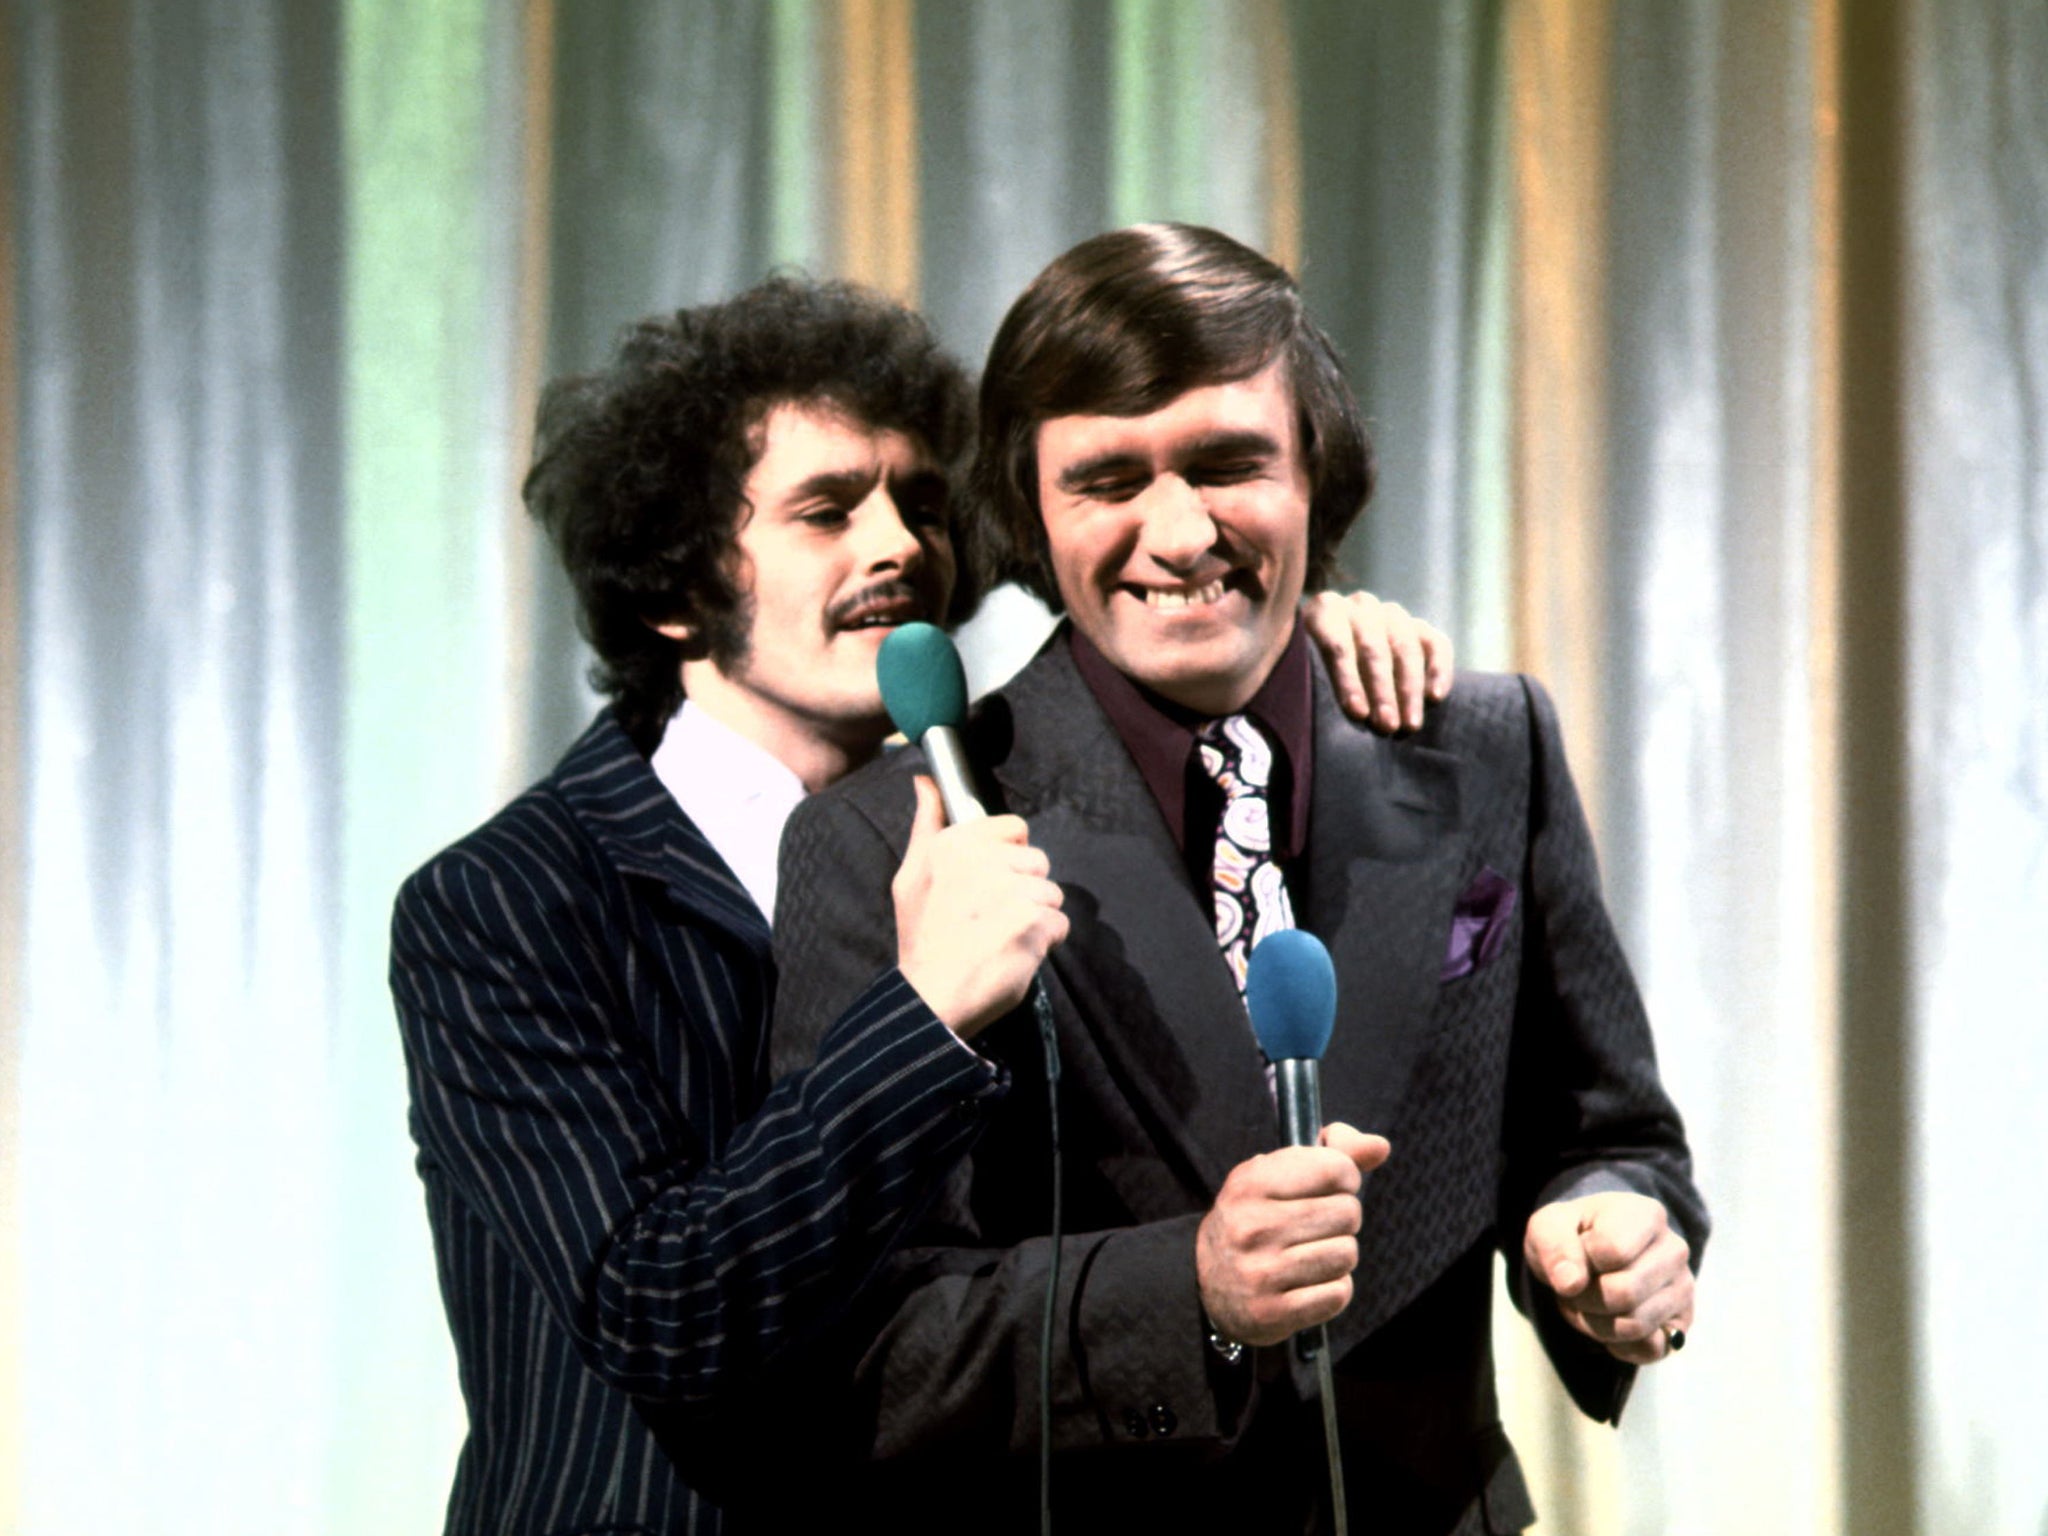 The double act on ‘Opportunity Knocks’ in Seventies